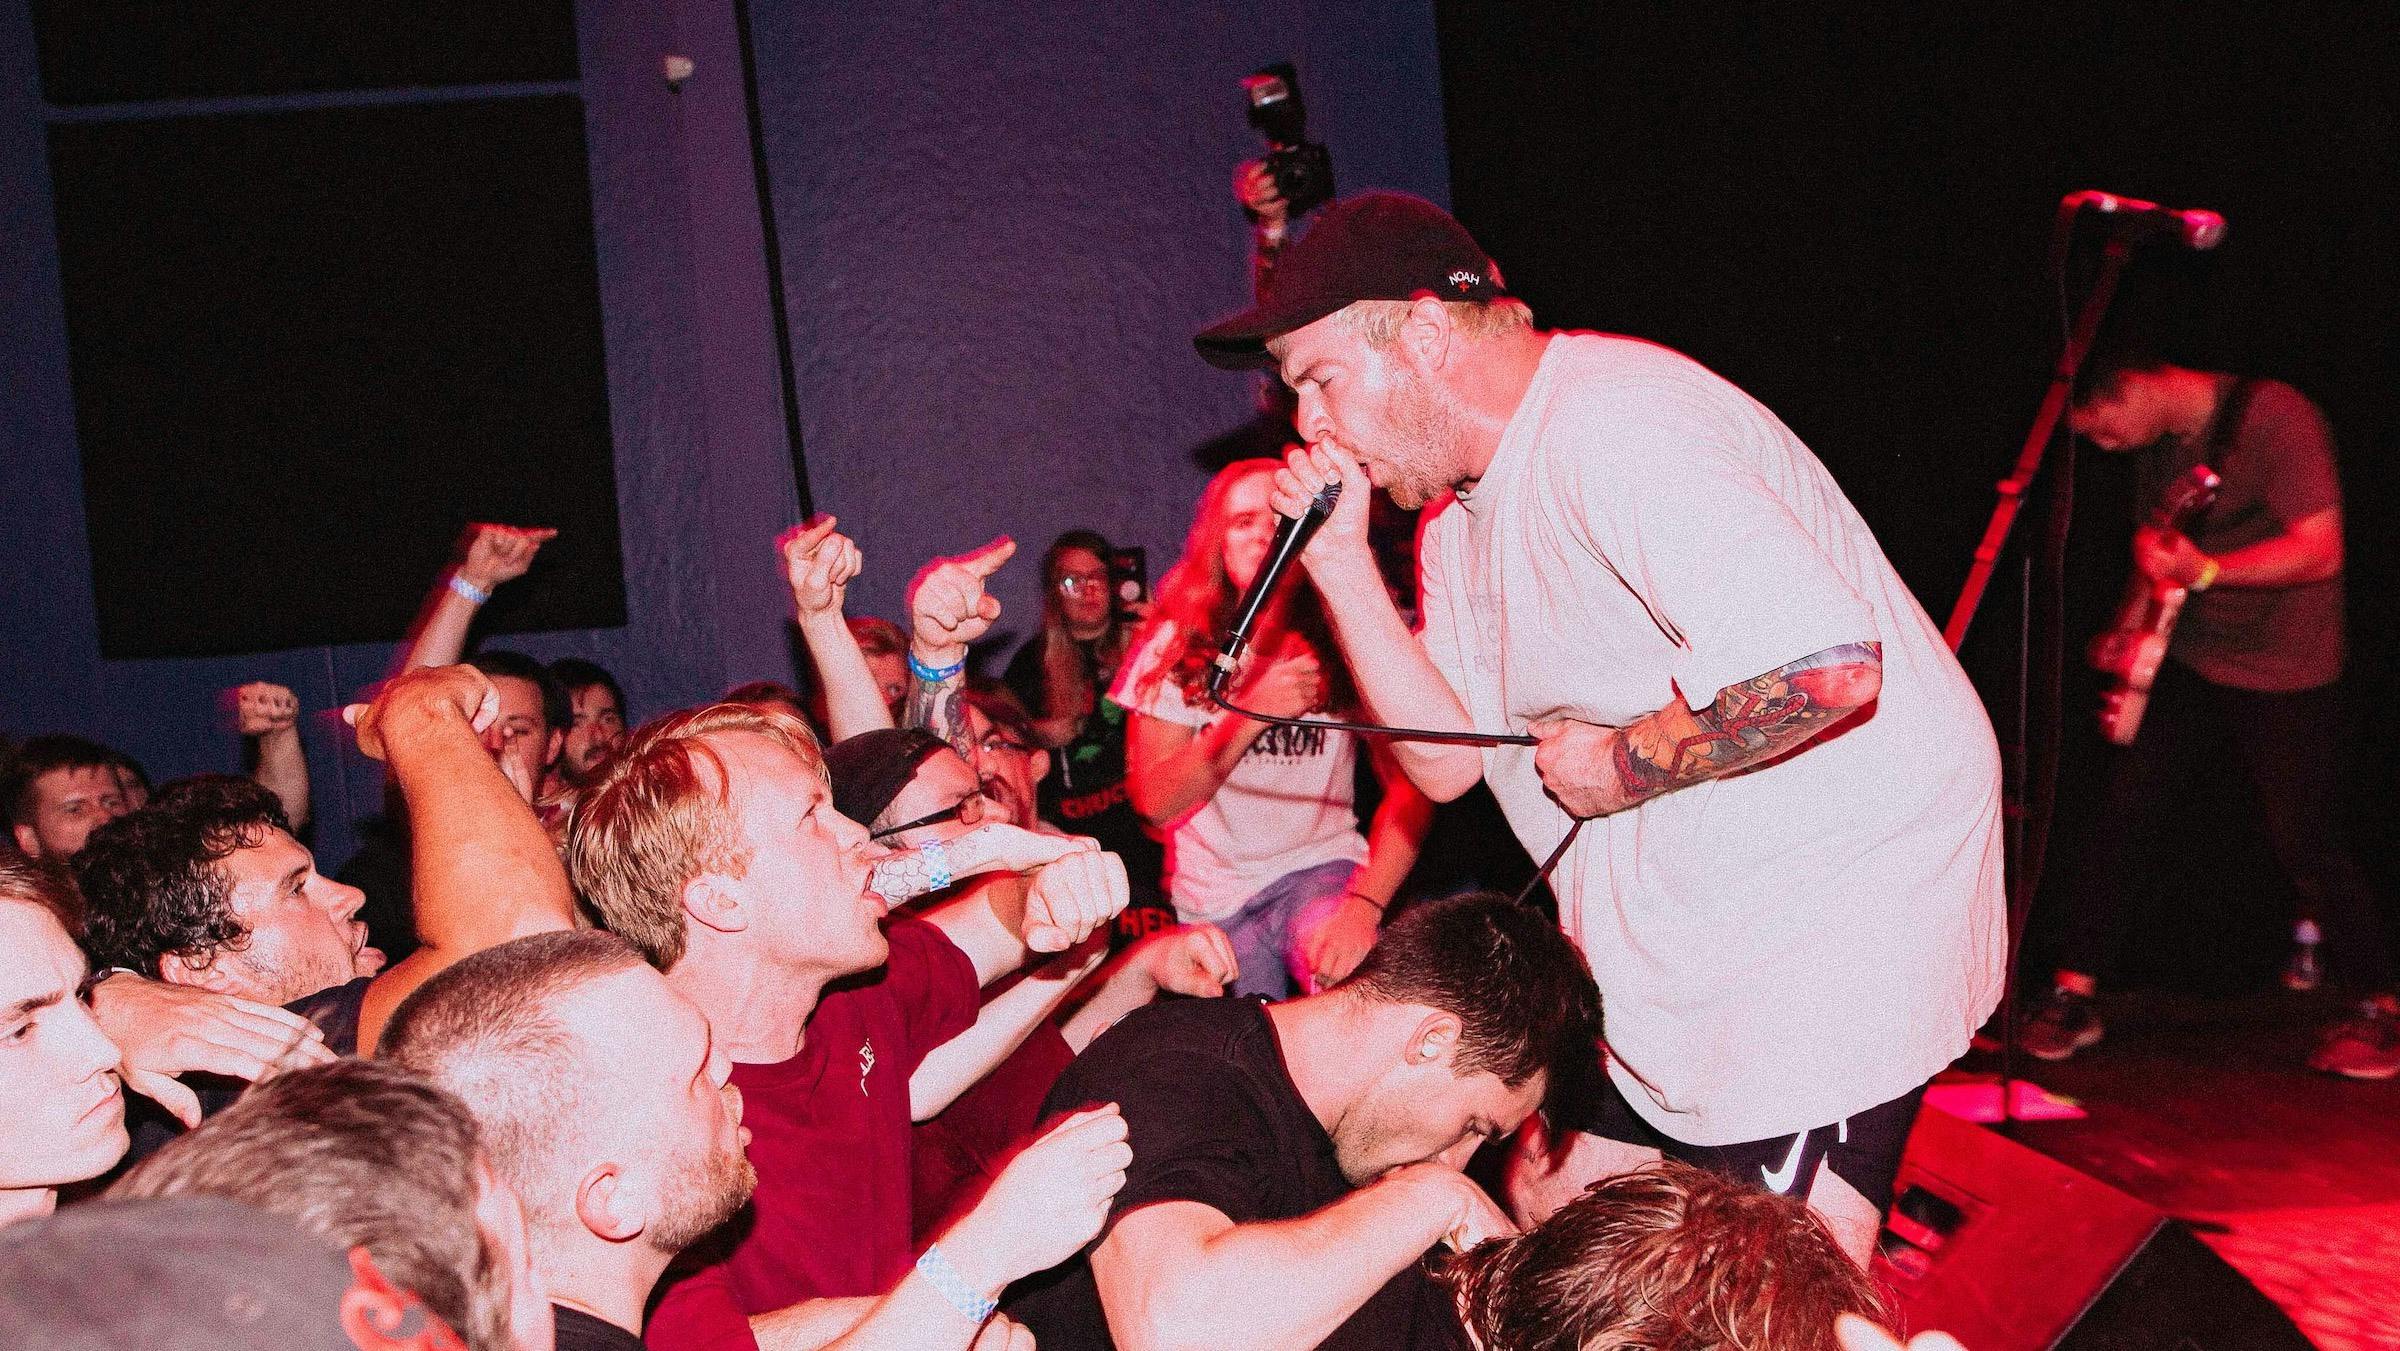 Counterparts Are Some Of Hardcore's Most Old-School Innovators